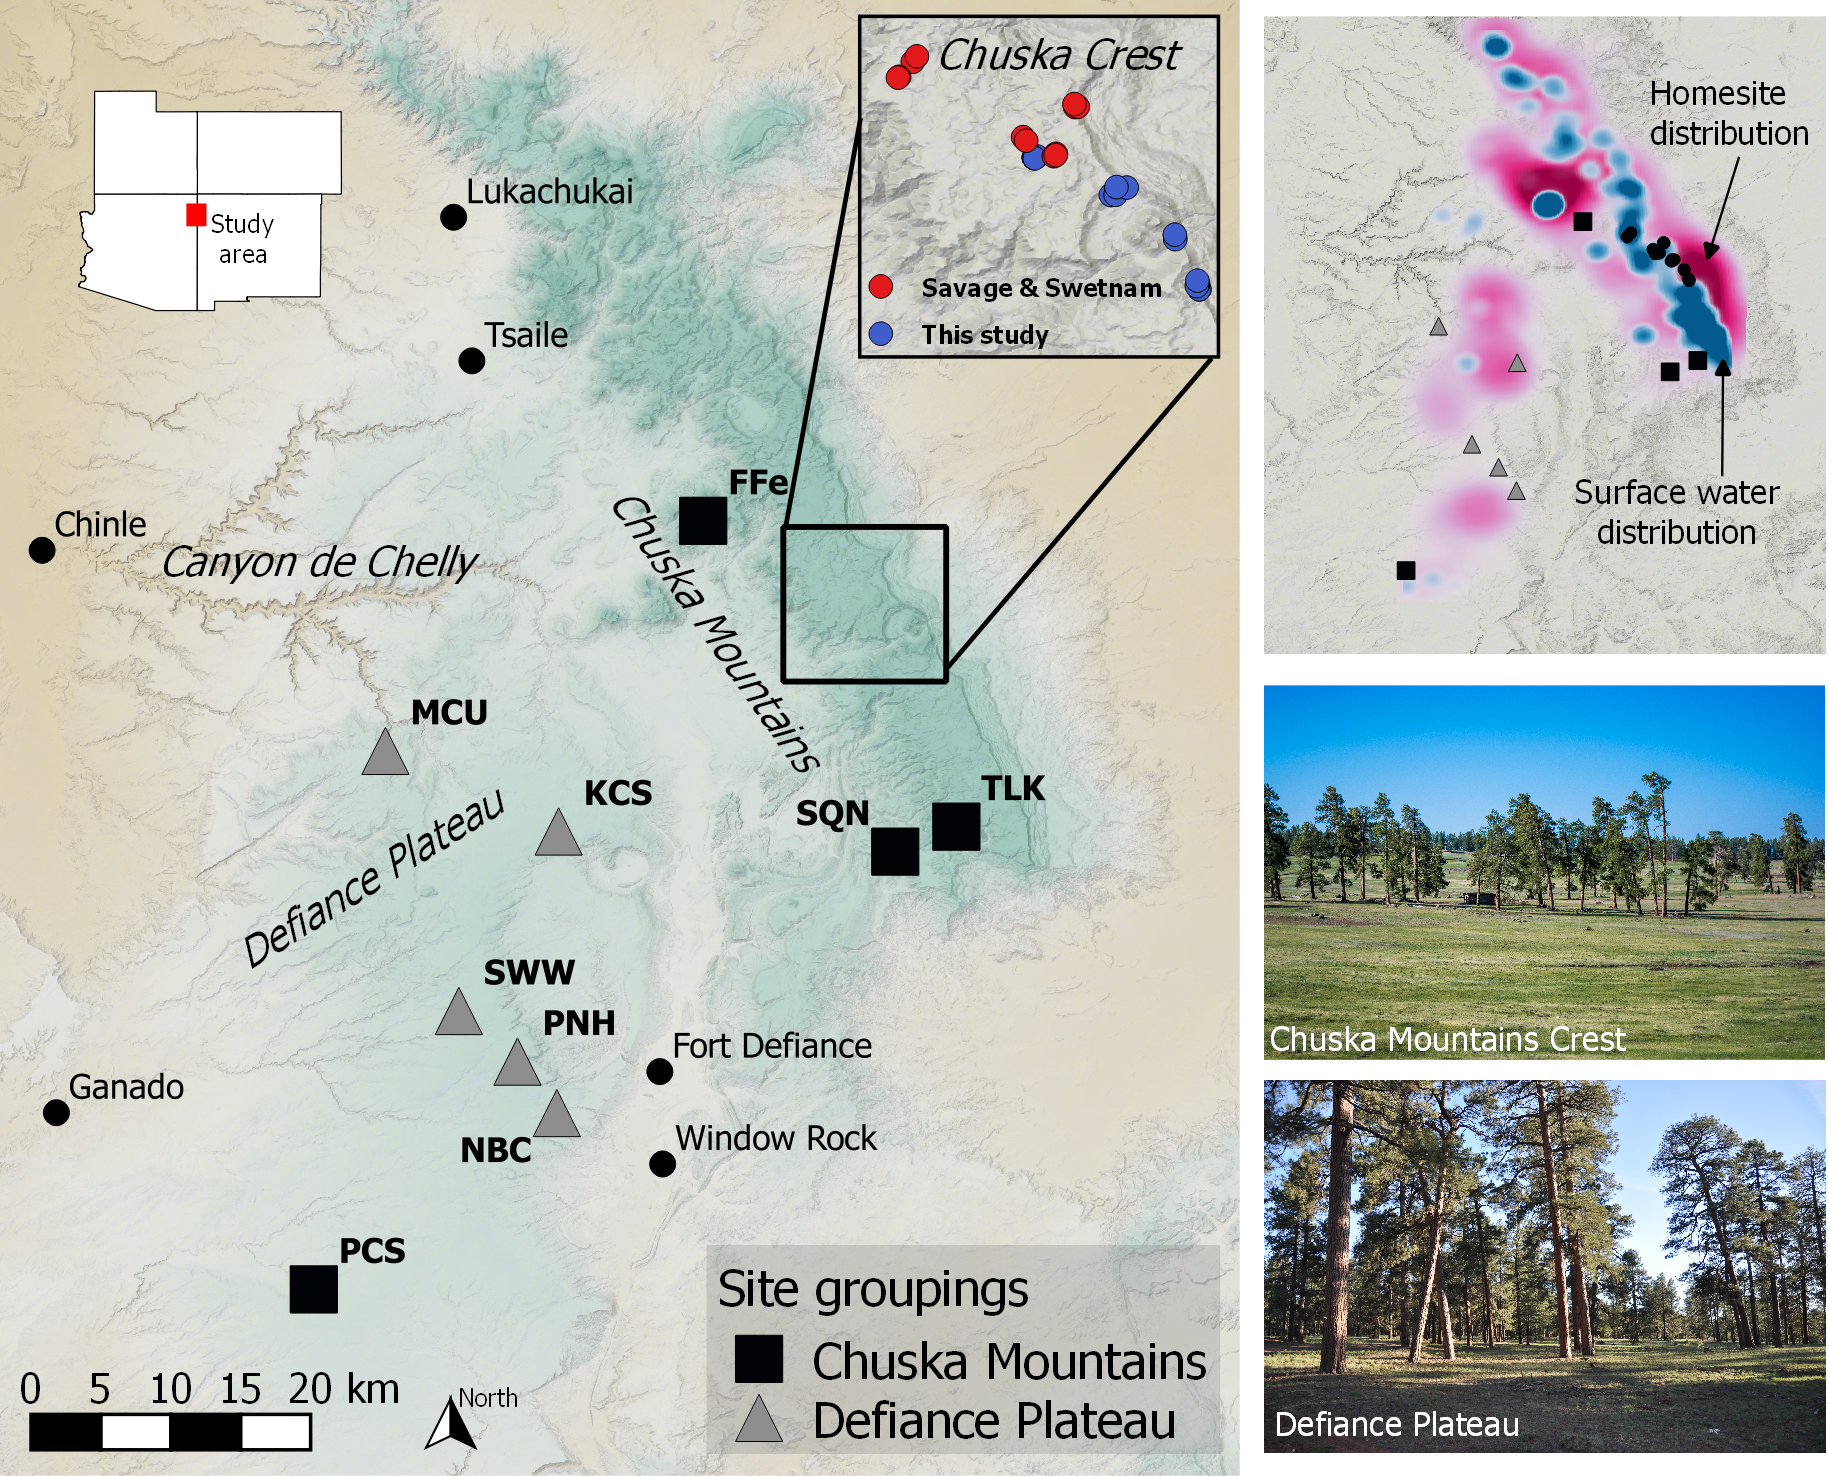 Distribution of fire-history sample sites in Navajo forests. On the left map, the inset on the upper left shows the study area location in the Four Corner States; at the upper right is the distribution of trees collected by Savage and Swetnam (1990) with our additional sampled trees. The upper-right map shows the density of present-day homesites and lakes in the study area, as an indication of historical concentrations of land use. At bottom right are photos of the Chuska Crest (credit Dan Ferguson) and the Defiance Plateau (credit Chris Guiterman).